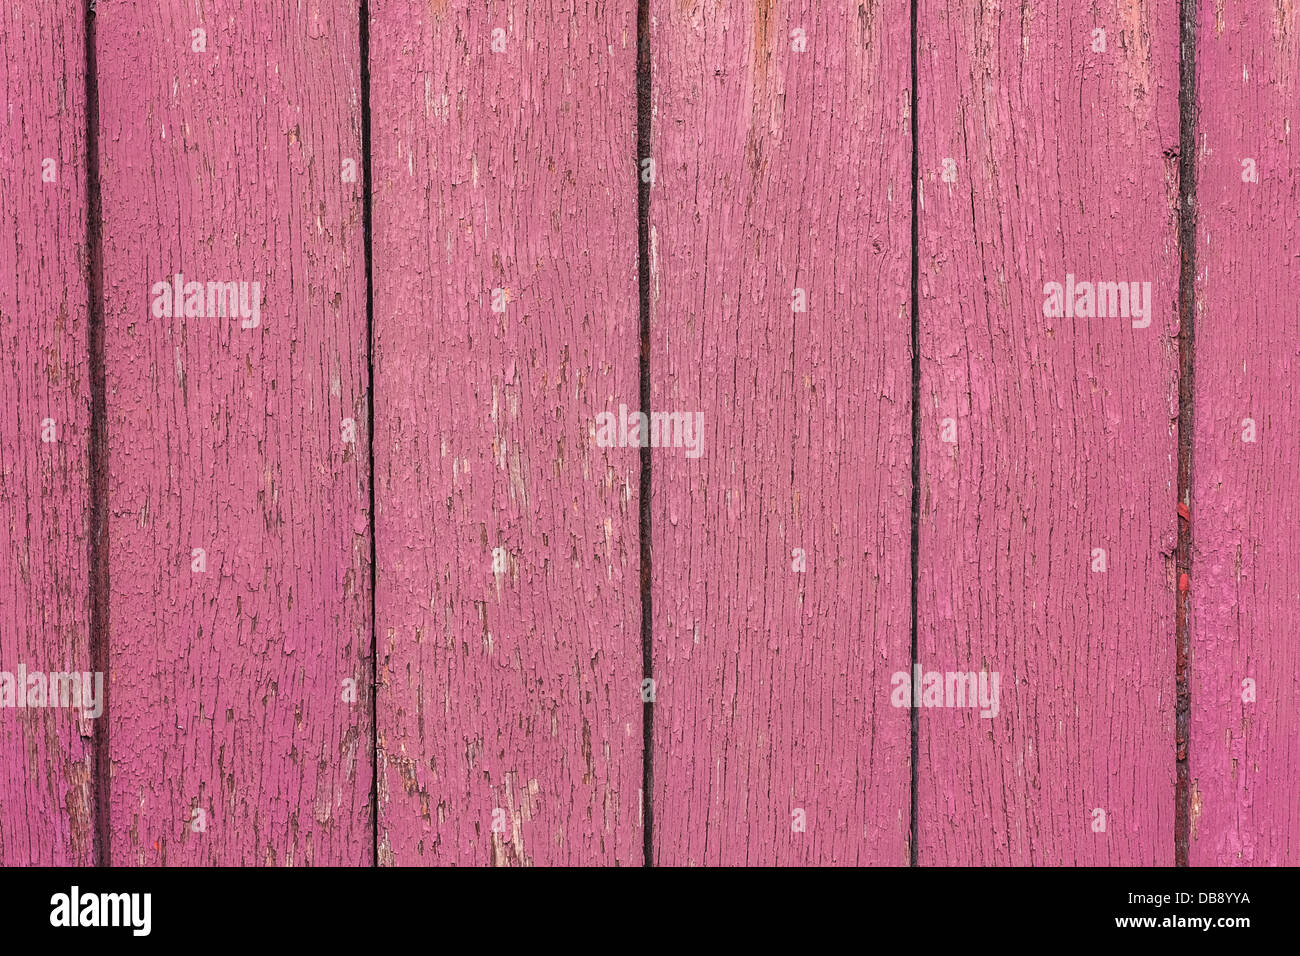 The Pink Grunge Wood Texture With Natural Patterns. Surface of old wood Paint over. Stock Photo